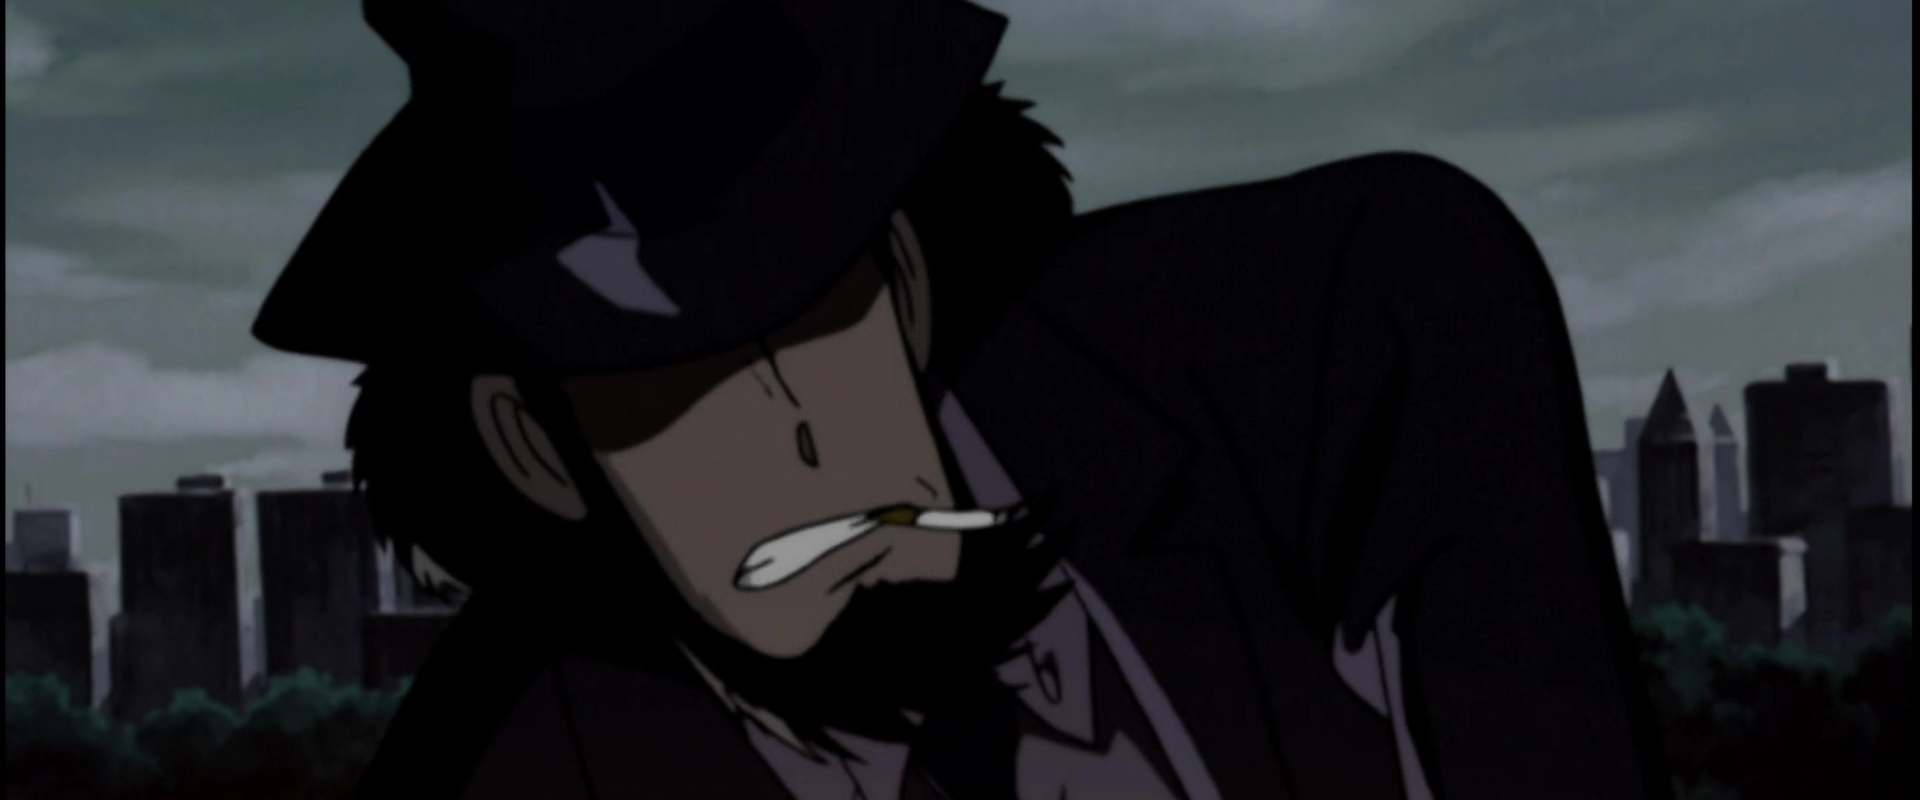 Lupin the Third: Episode 0: First Contact background 2